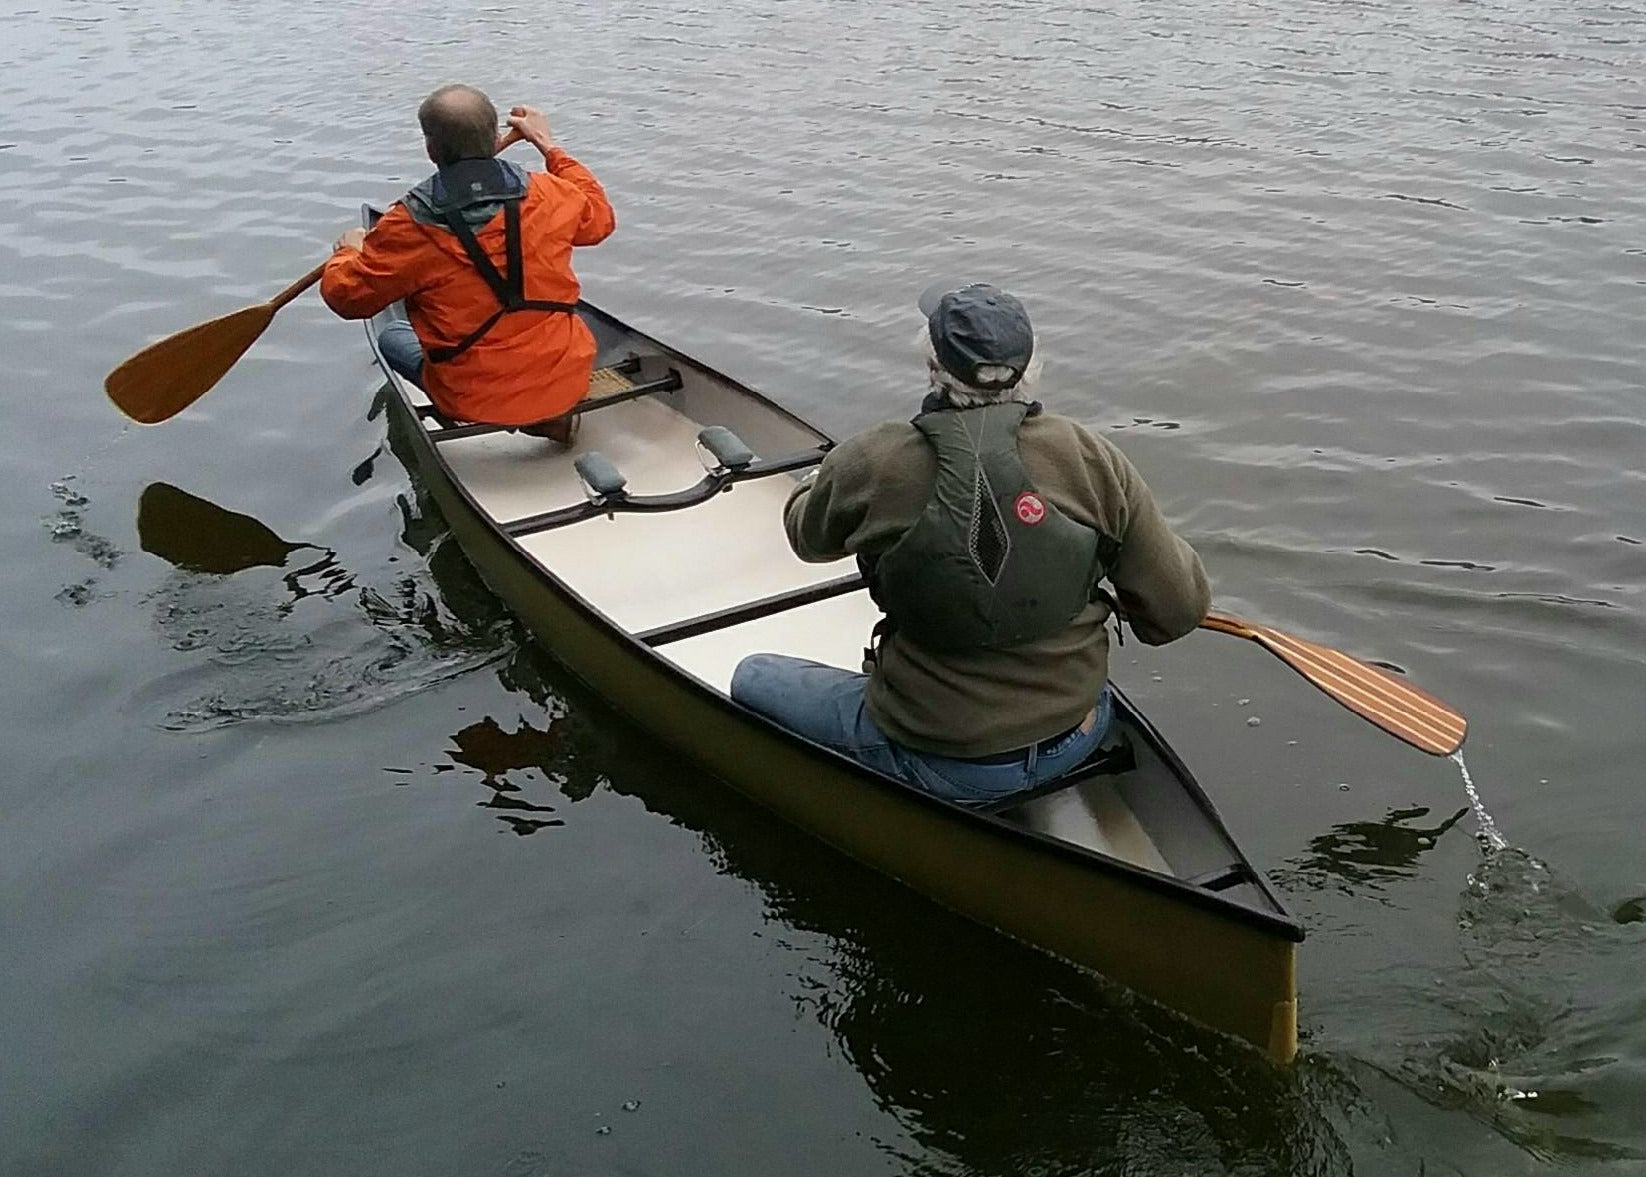 Randy Pfeifer and a paddling partner, seen from behind, test his composite canoe on the water